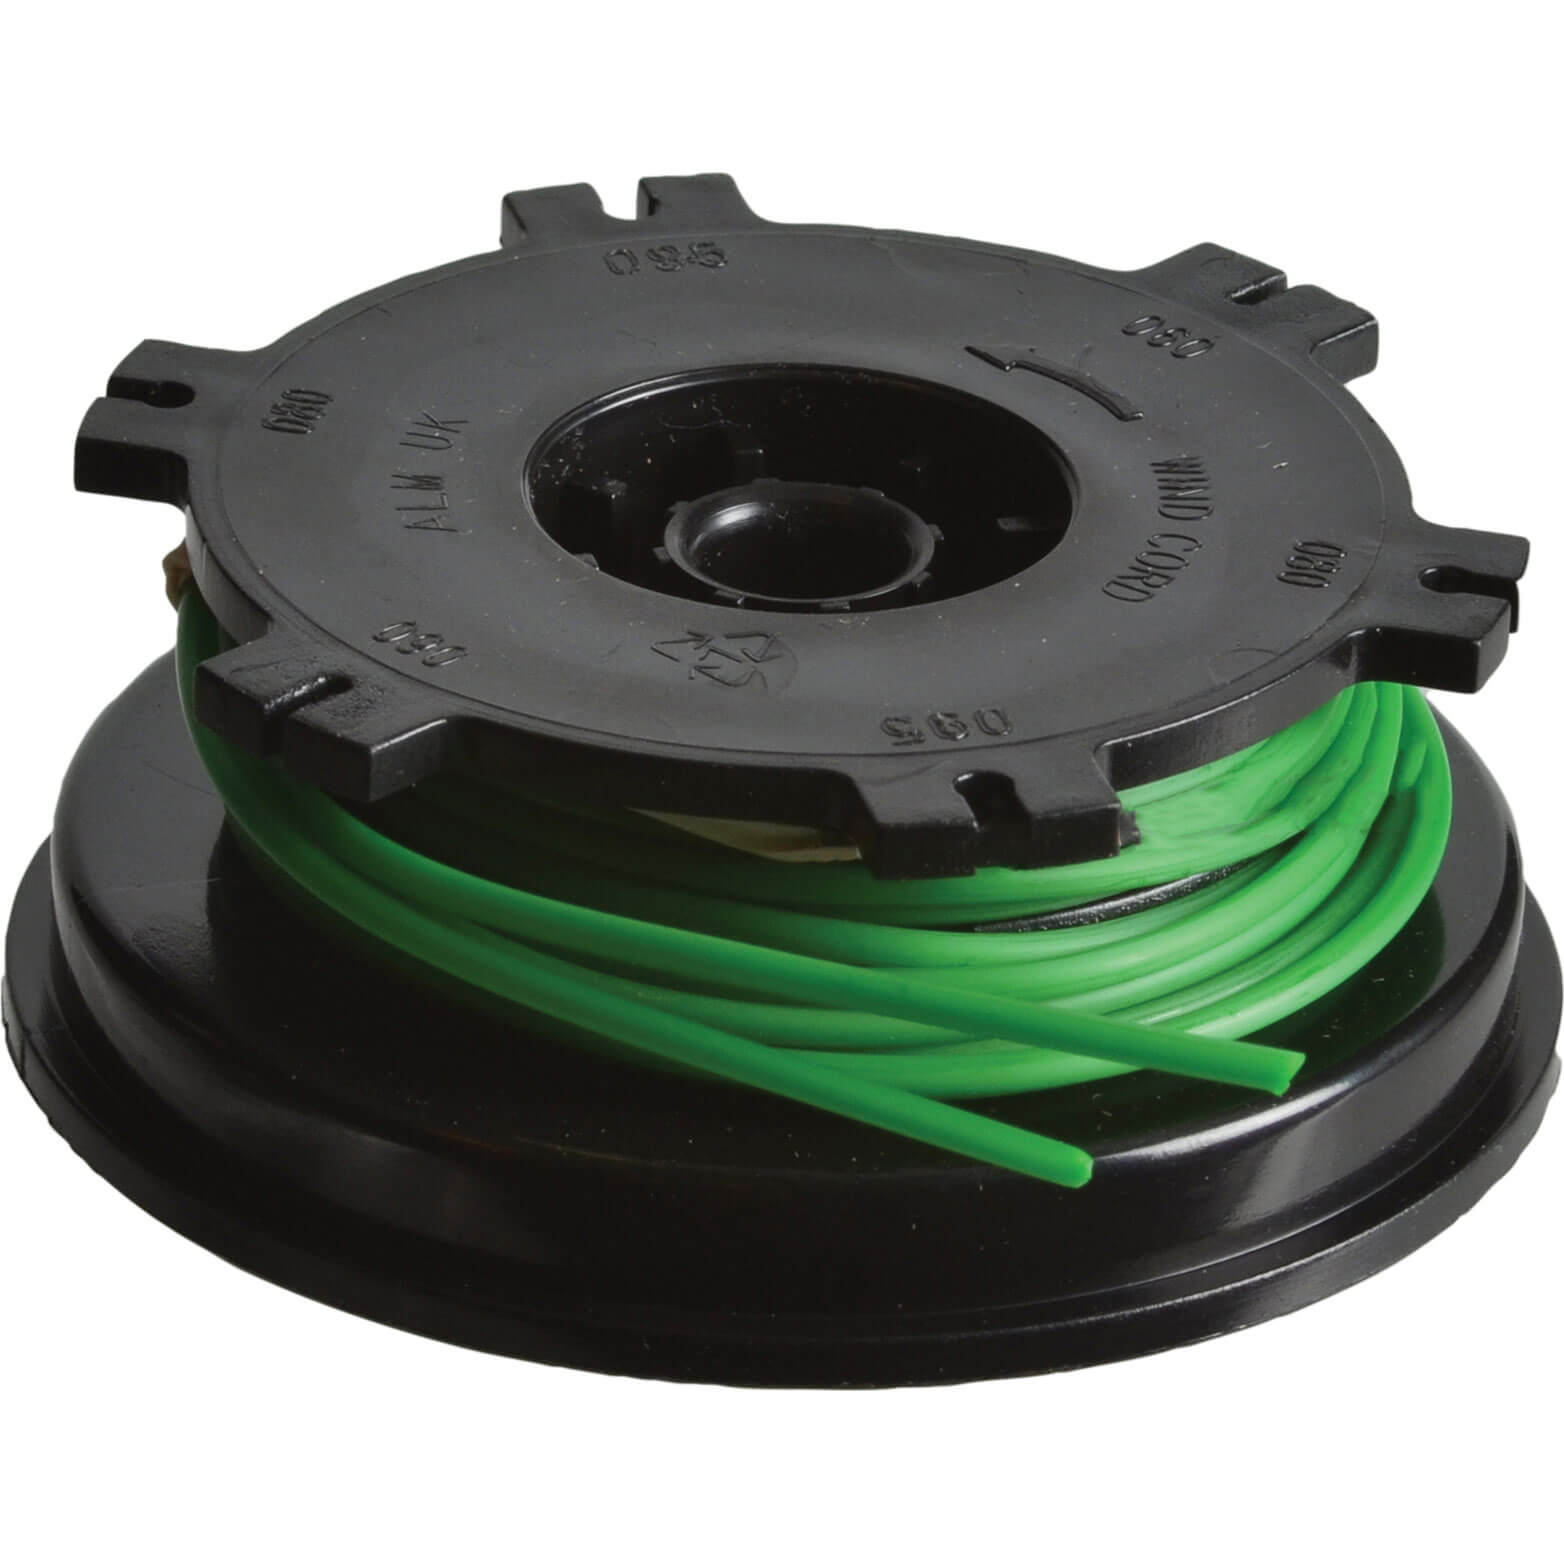 ALM Manufacturing HL001 Spool and Line to Fit Homelite Petrol Trimmers